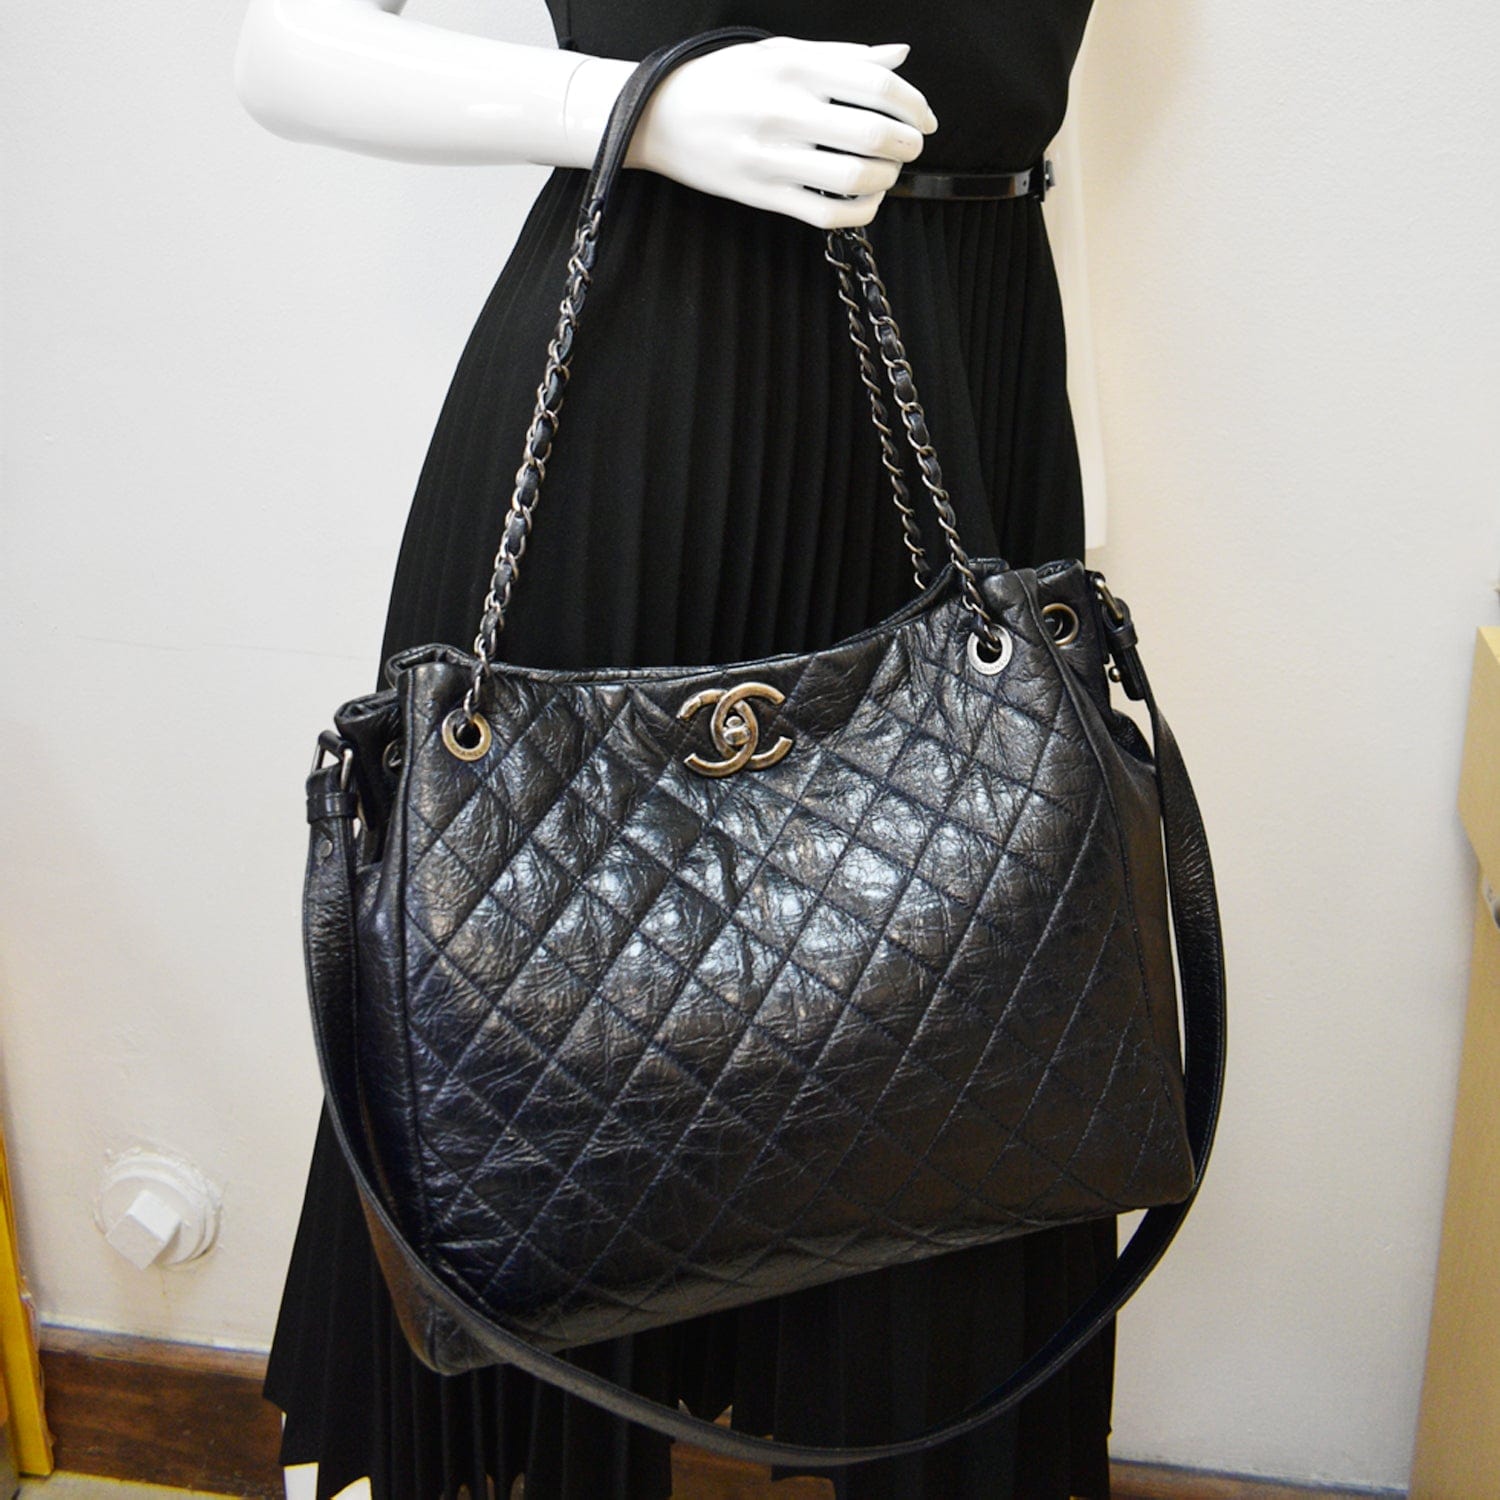 CHANEL Glazed Calfskin Quilted Shopping Tote Black 1243477